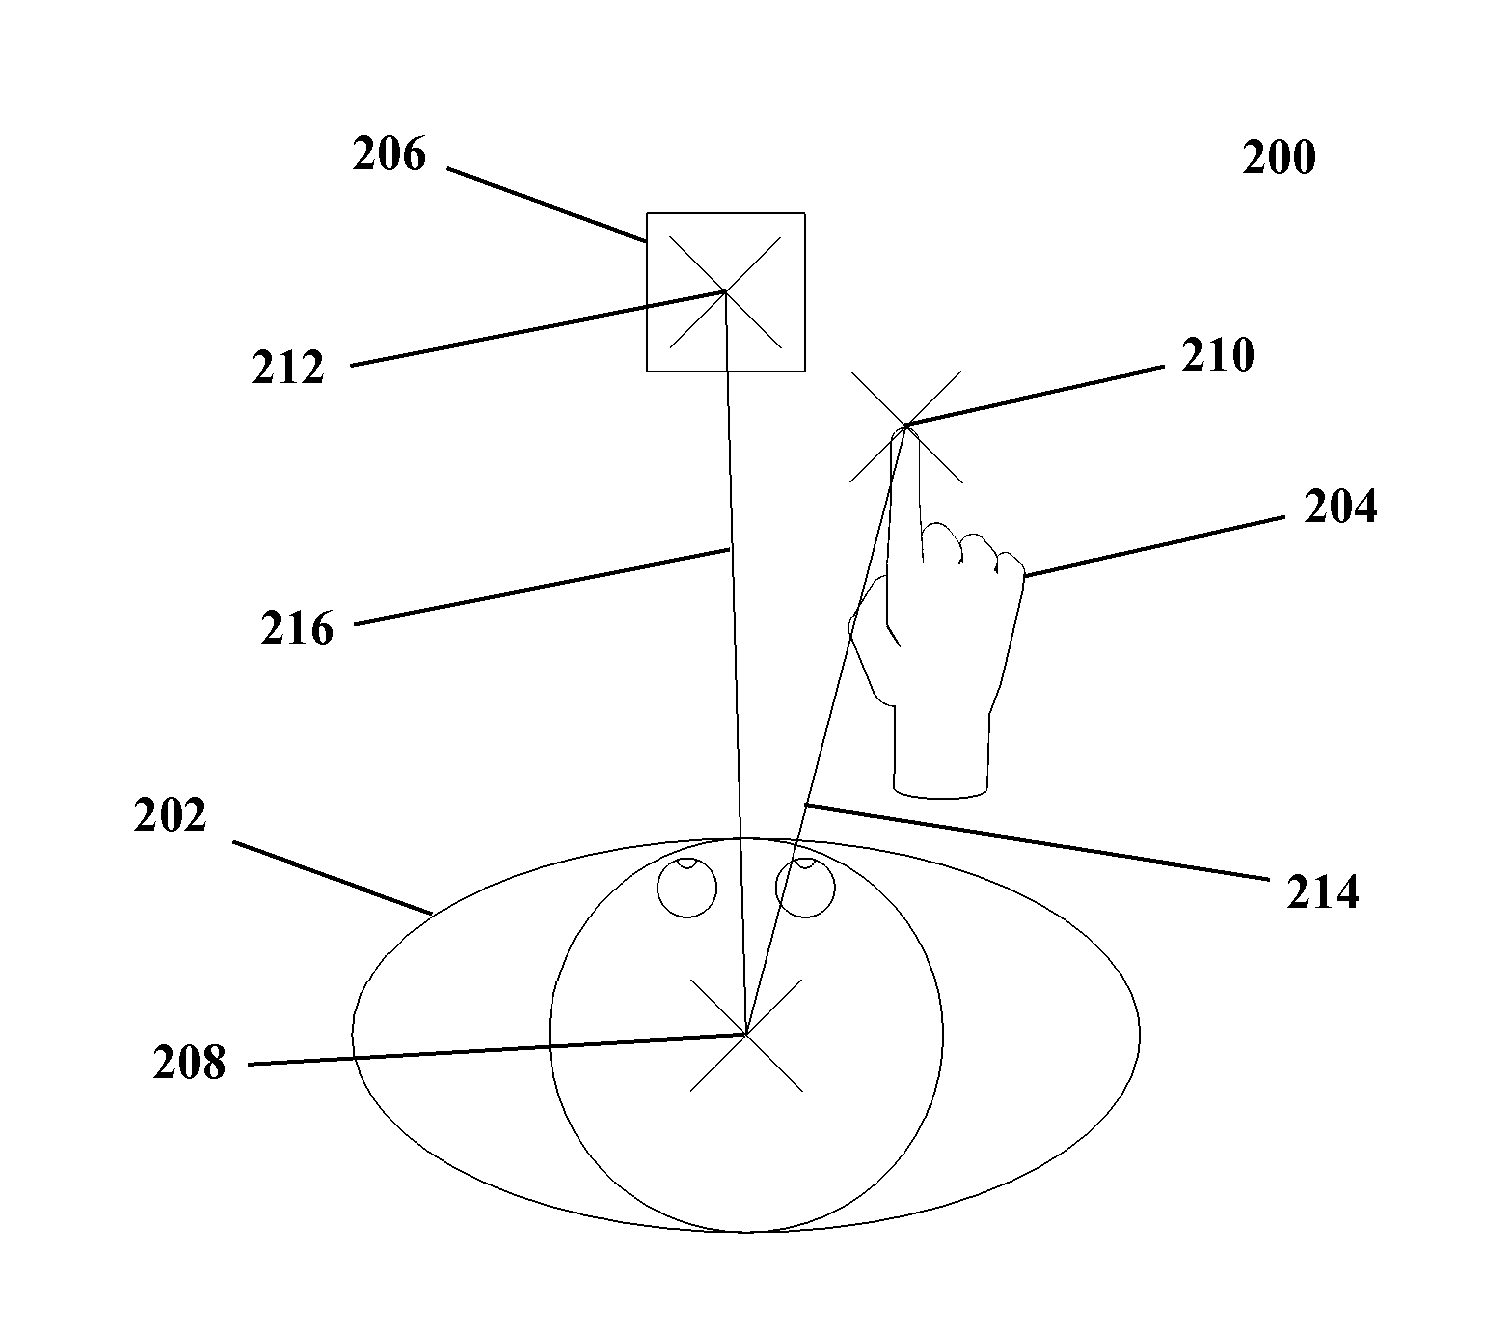 Method and apparatus for addressing obstruction in an interface